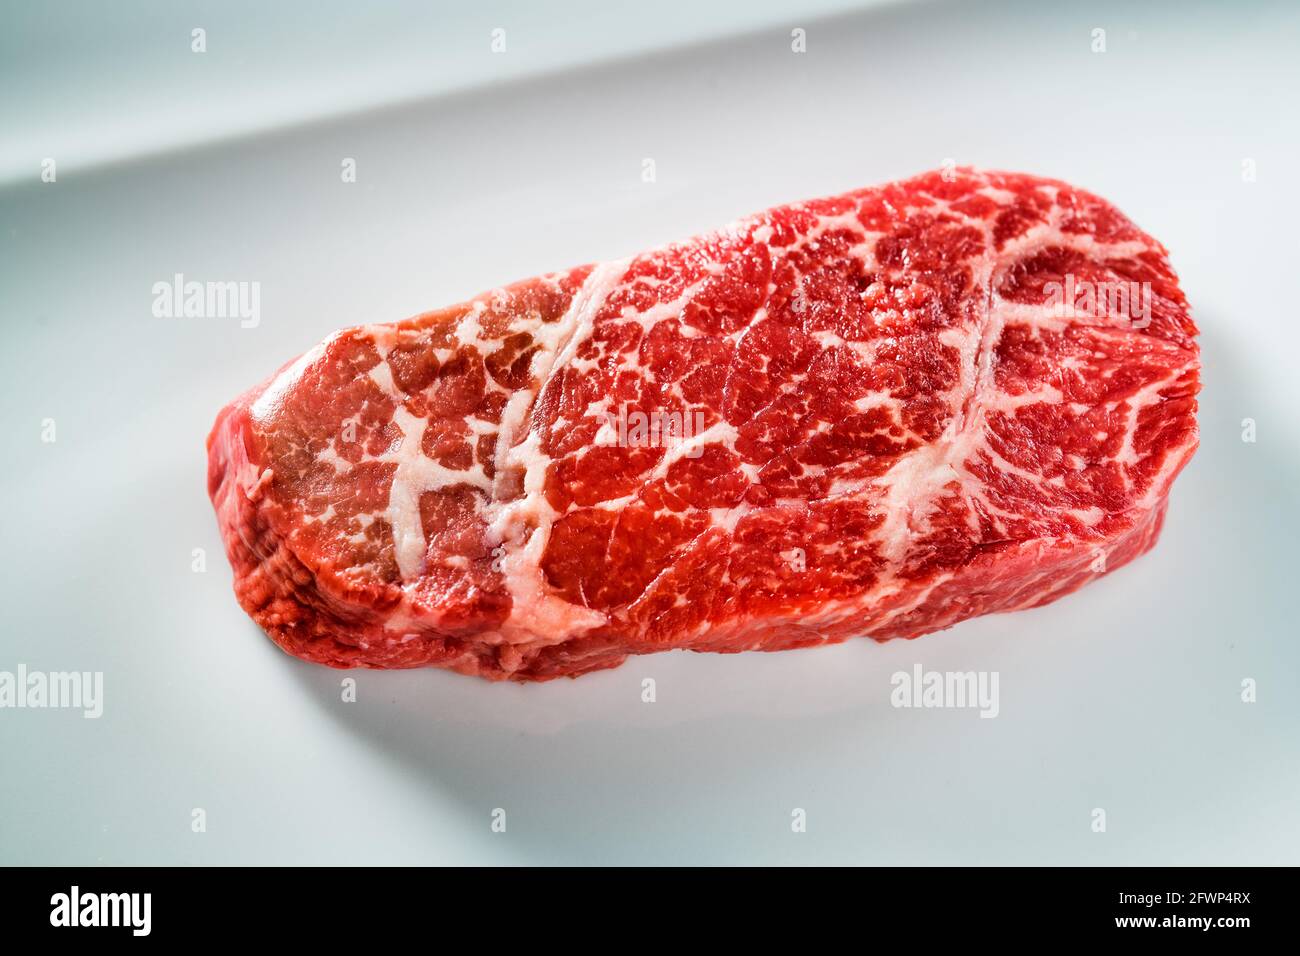 Finest environmentally gently produced beef, pure Angus, meat raw, steak perfectly marbled and streaked with fat veins Best meat quality for gourmets Stock Photo